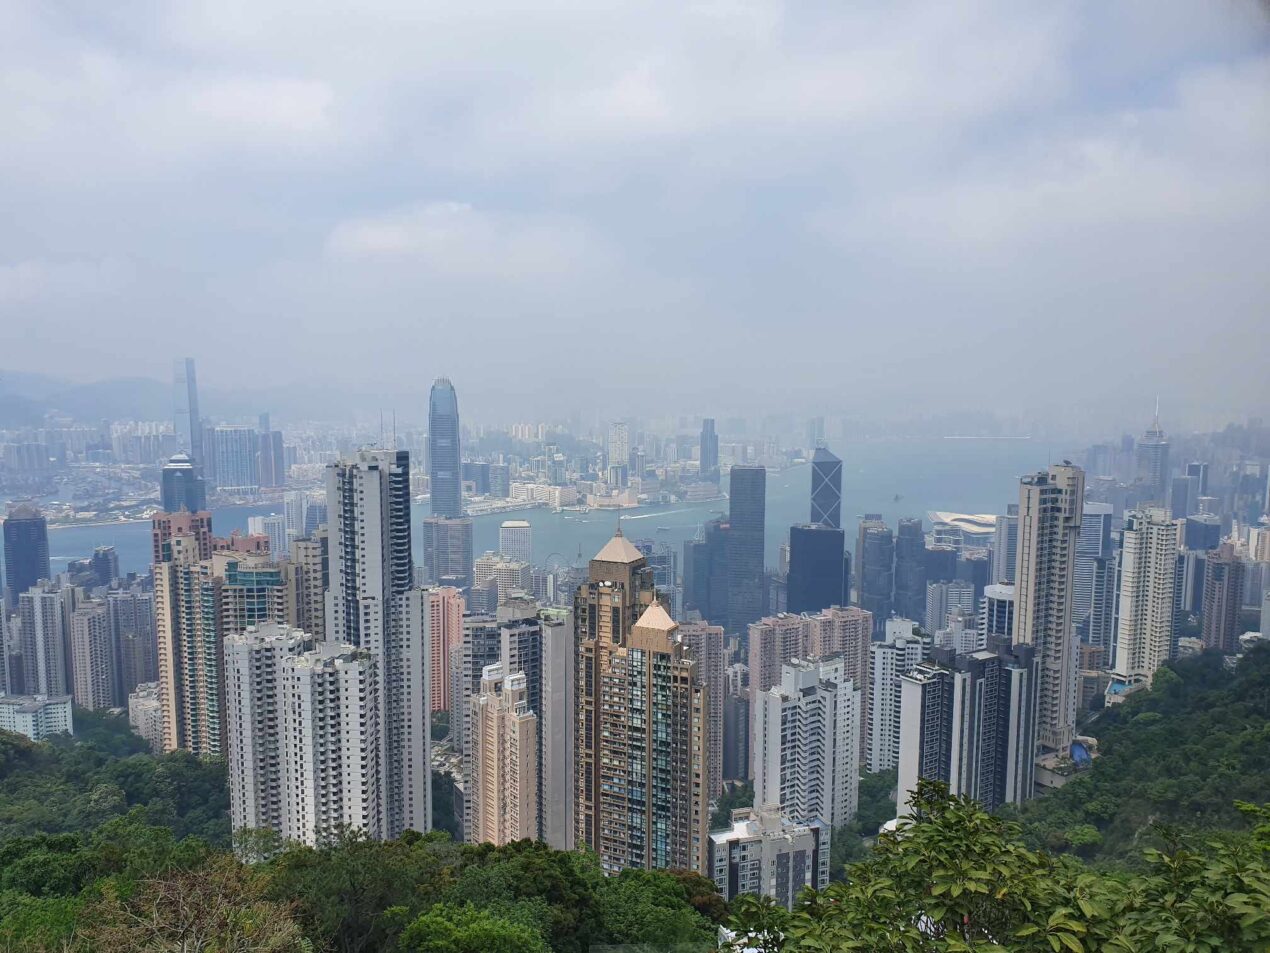 View of Mid-Levels from the top of Victoria Peak